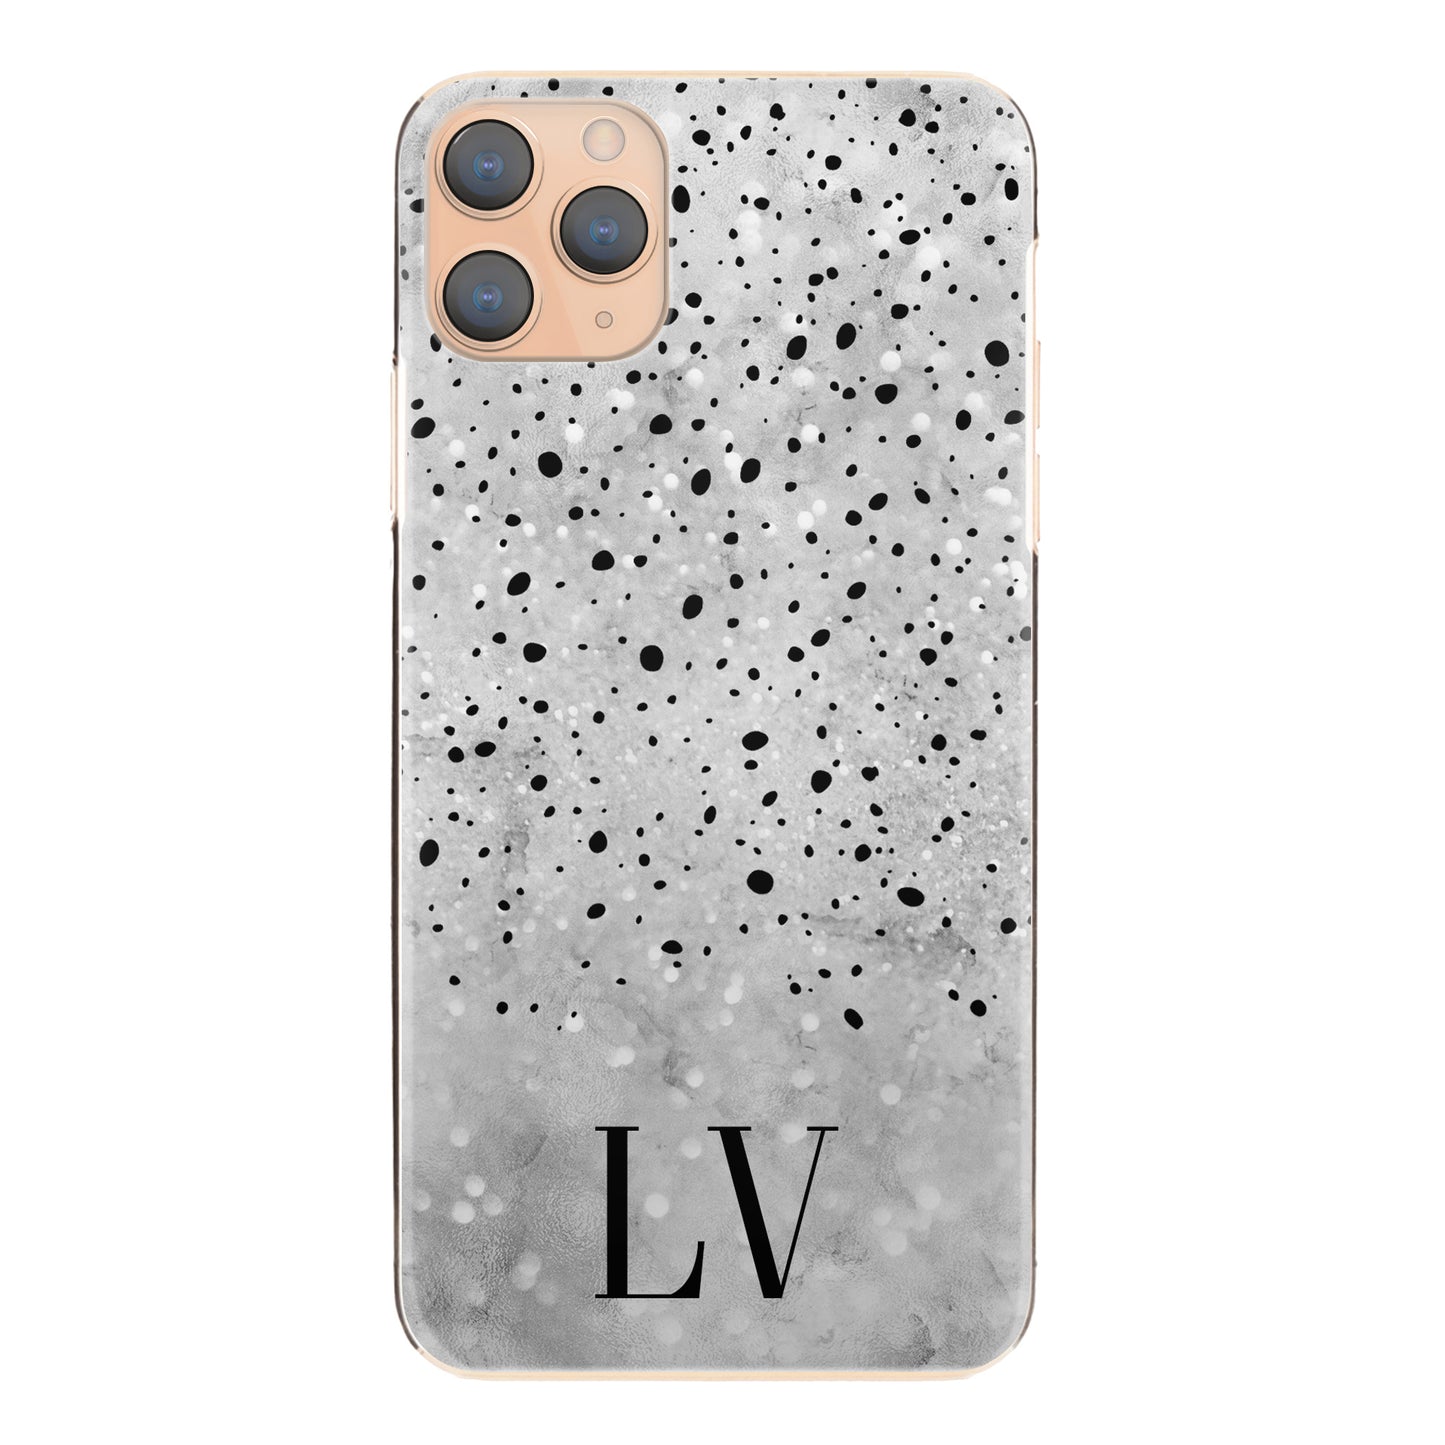 Personalised Motorola Phone Hard Case with Classy Initials on Textured Grey and Black Dots